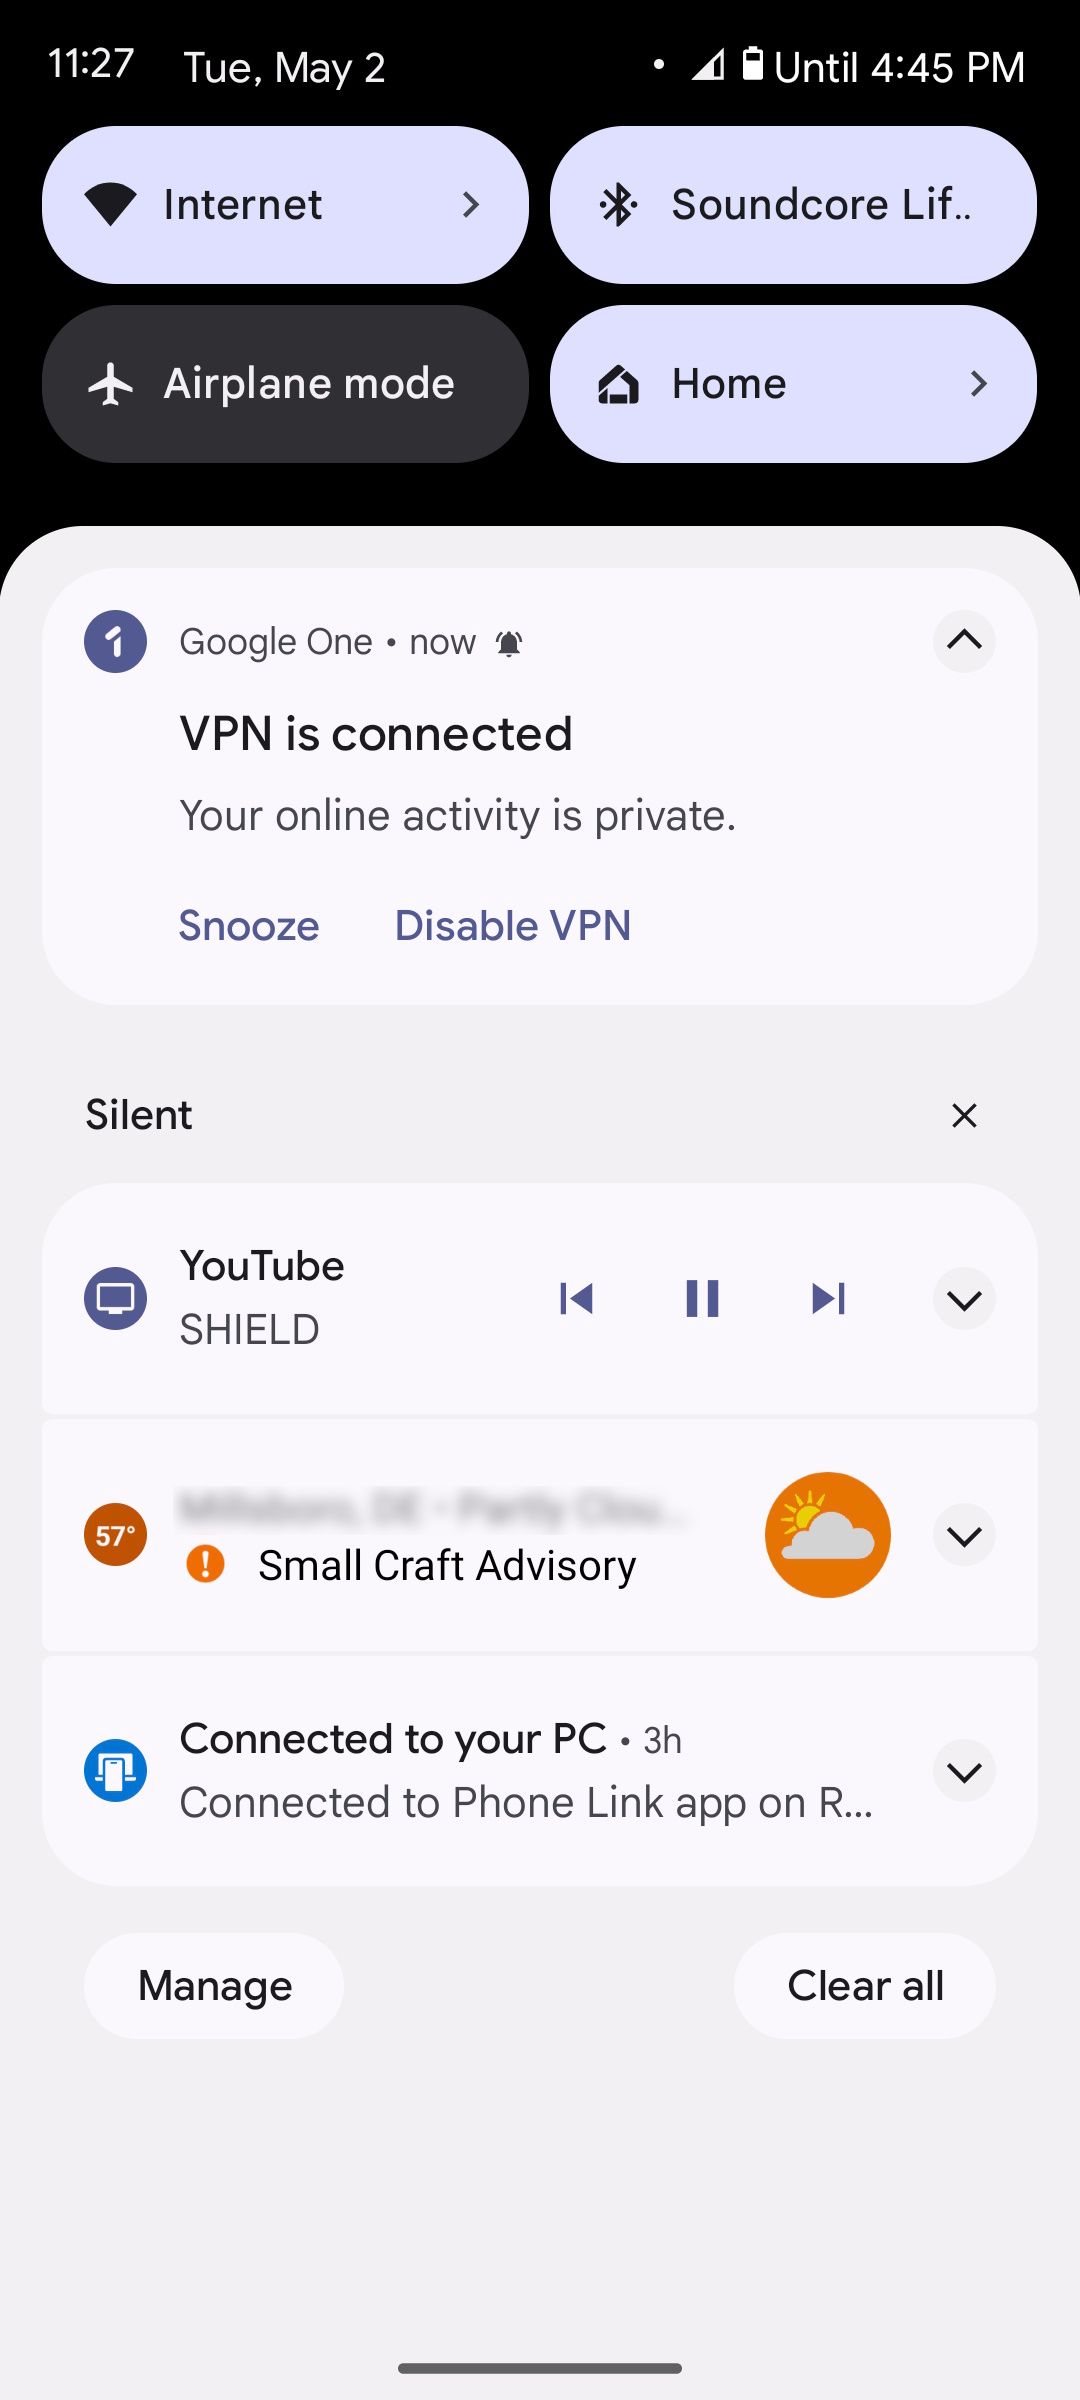 Successfully connecting to VPN by Google One